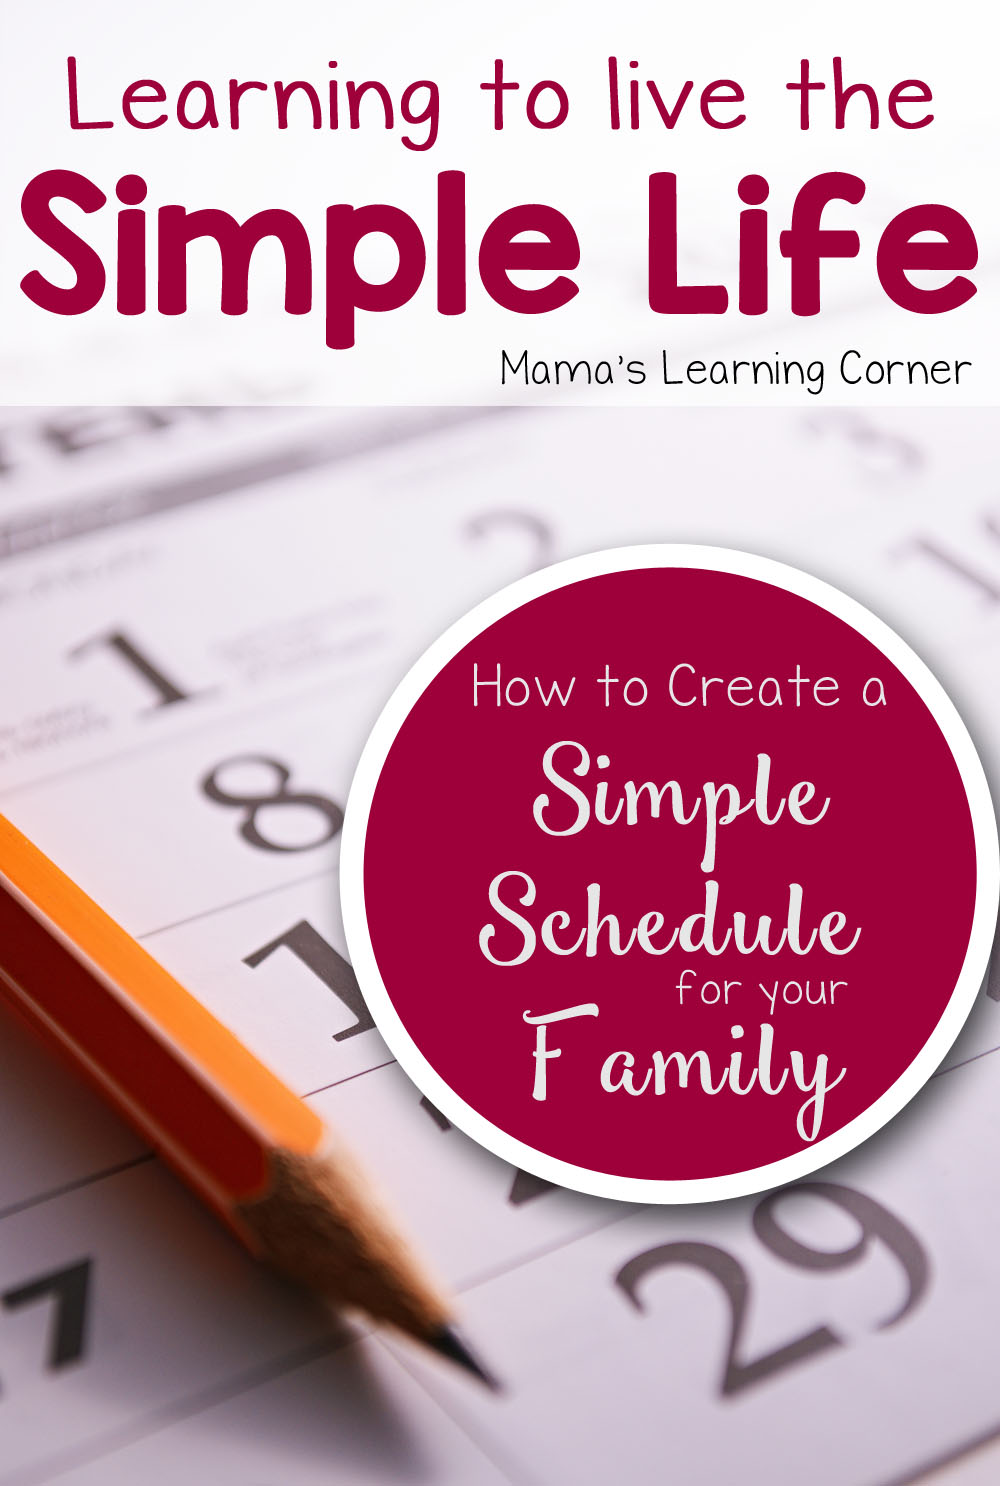 Living the Simple Life: How to Create a Simple Schedule for Your Family